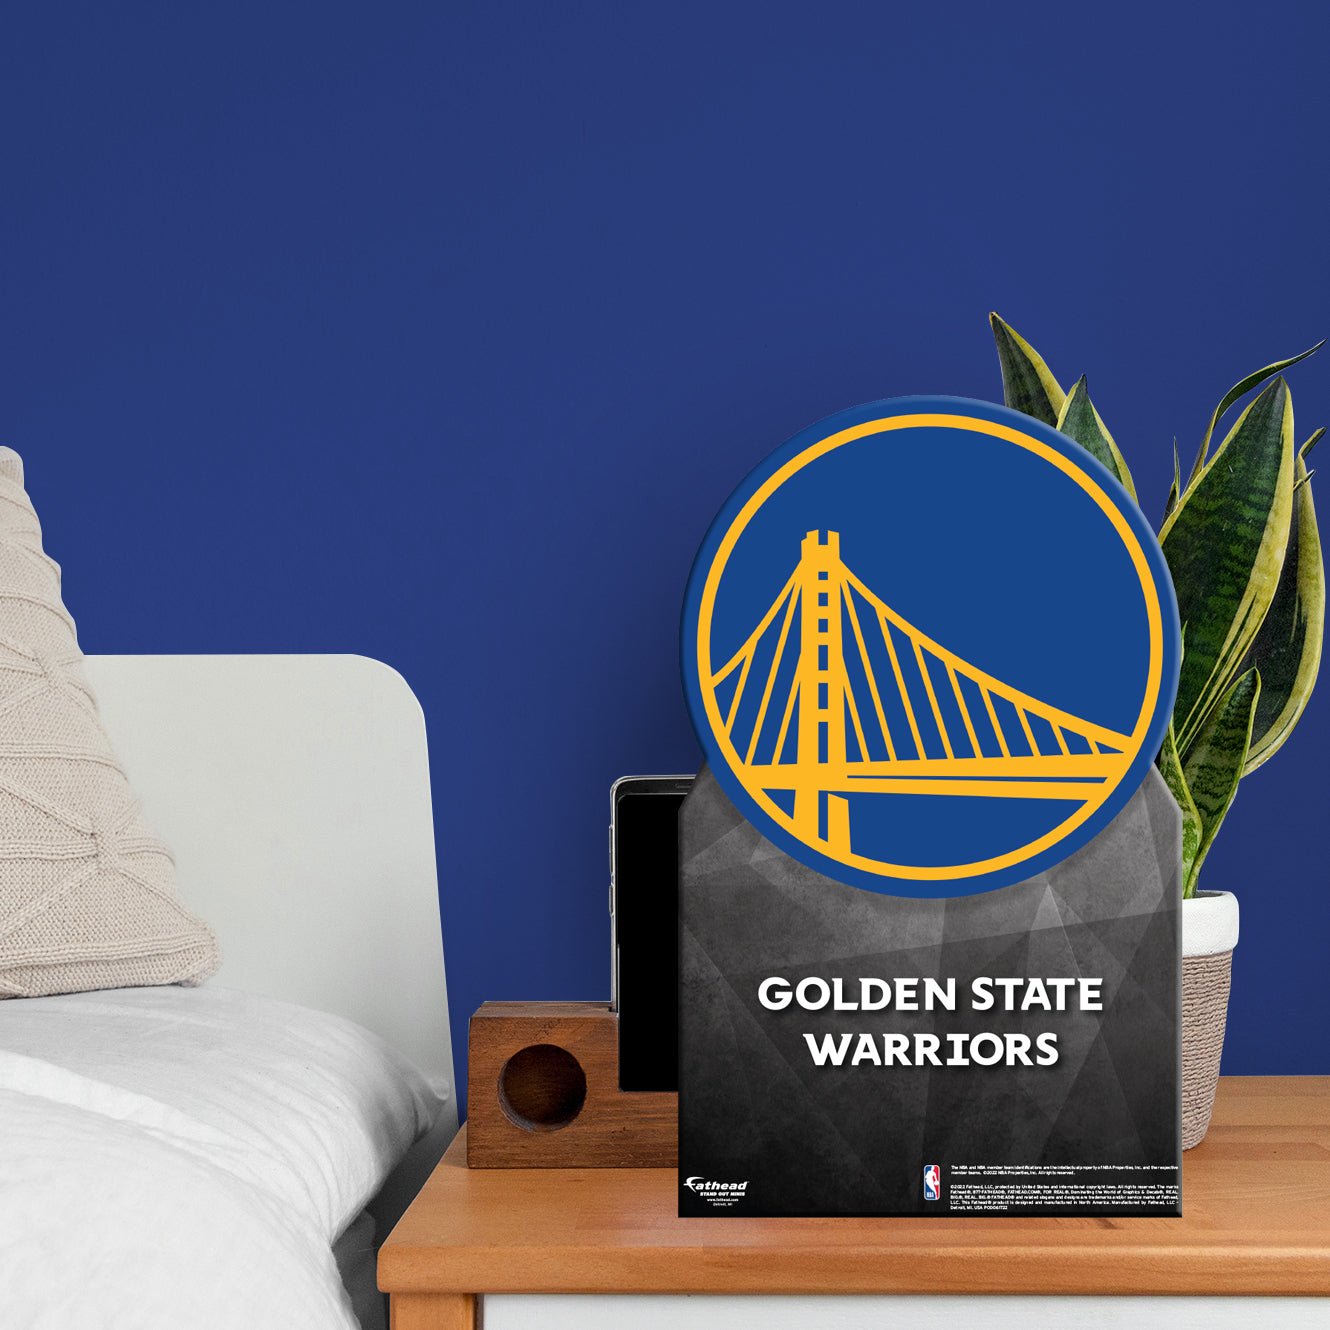 Golden State Warriors: 2022 Champions Logo - Officially Licensed NBA R –  Fathead